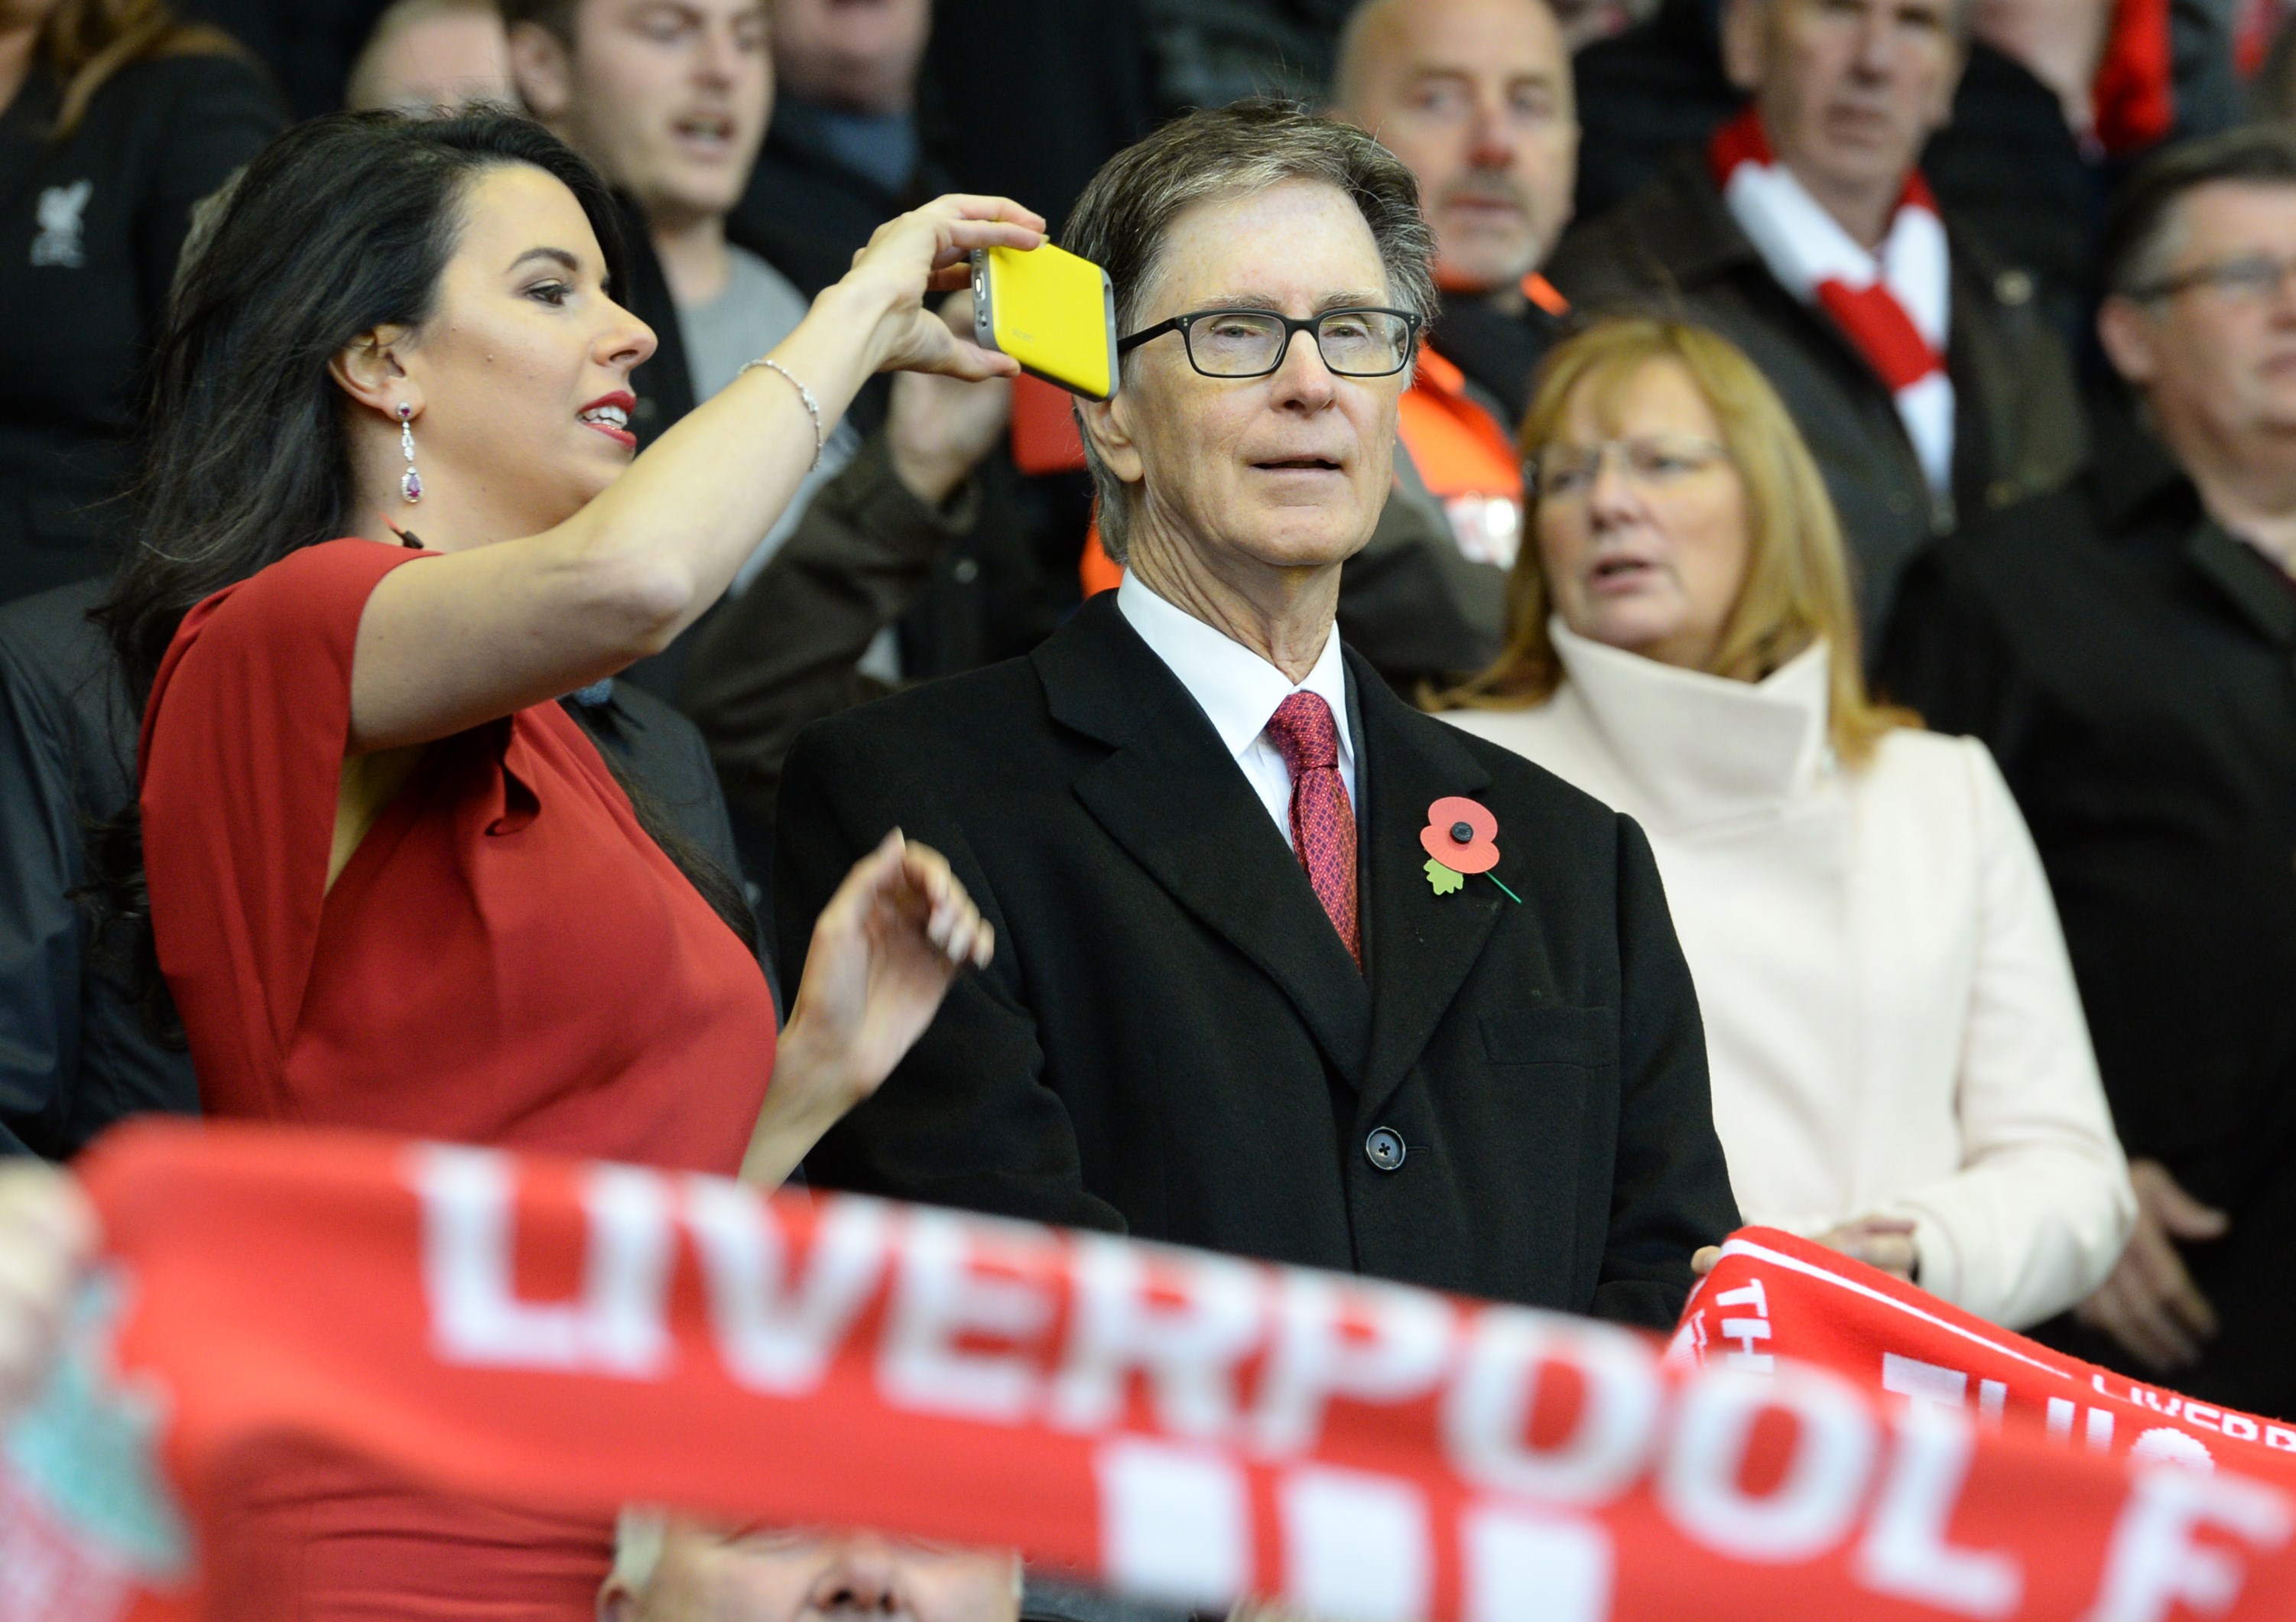 Liverpool's US owner John W. Henry's wife Linda Pizzuti (L) takes a photograph during the English Premier League football match between Liverpool and Southampton at Anfield stadium in Liverpool, north west England on October 25, 2015. AFP PHOTO / OLI SCARFF

RESTRICTED TO EDITORIAL USE. No use with unauthorized audio, video, data, fixture lists, club/league logos or 'live' services. Online in-match use limited to 75 images, no video emulation. No use in betting, games or single club/league/player publications.        (Photo credit should read OLI SCARFF/AFP/Getty Images)